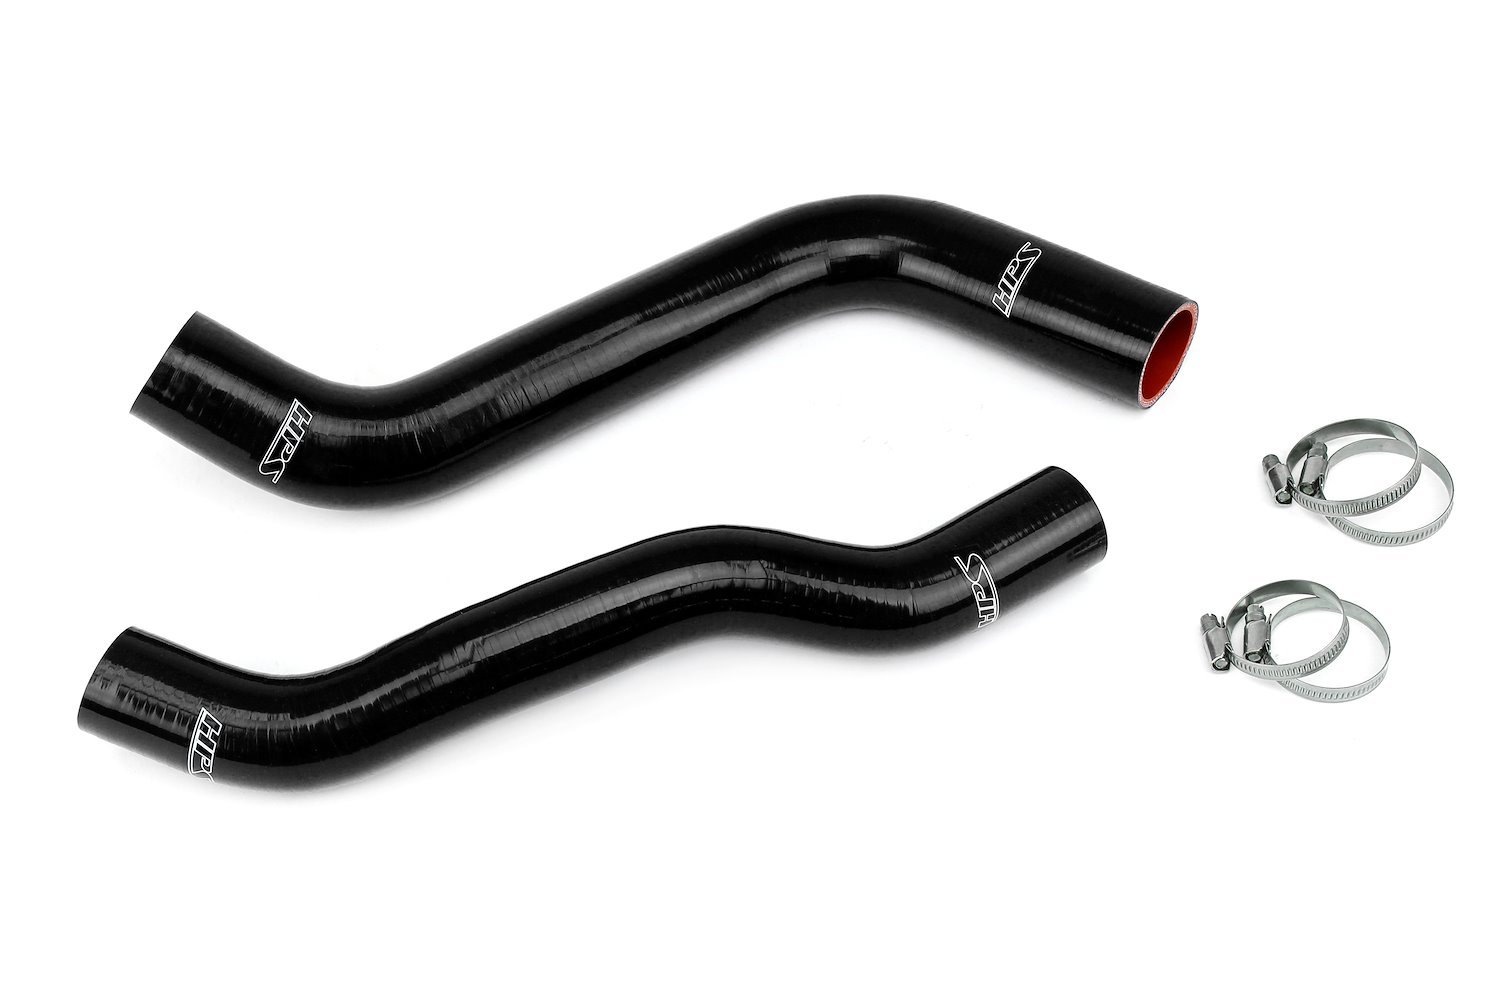 57-1835-BLK Radiator Hose Kit, 3-Ply Reinforced Silicone, Replaces Rubber Radiator Coolant Hoses